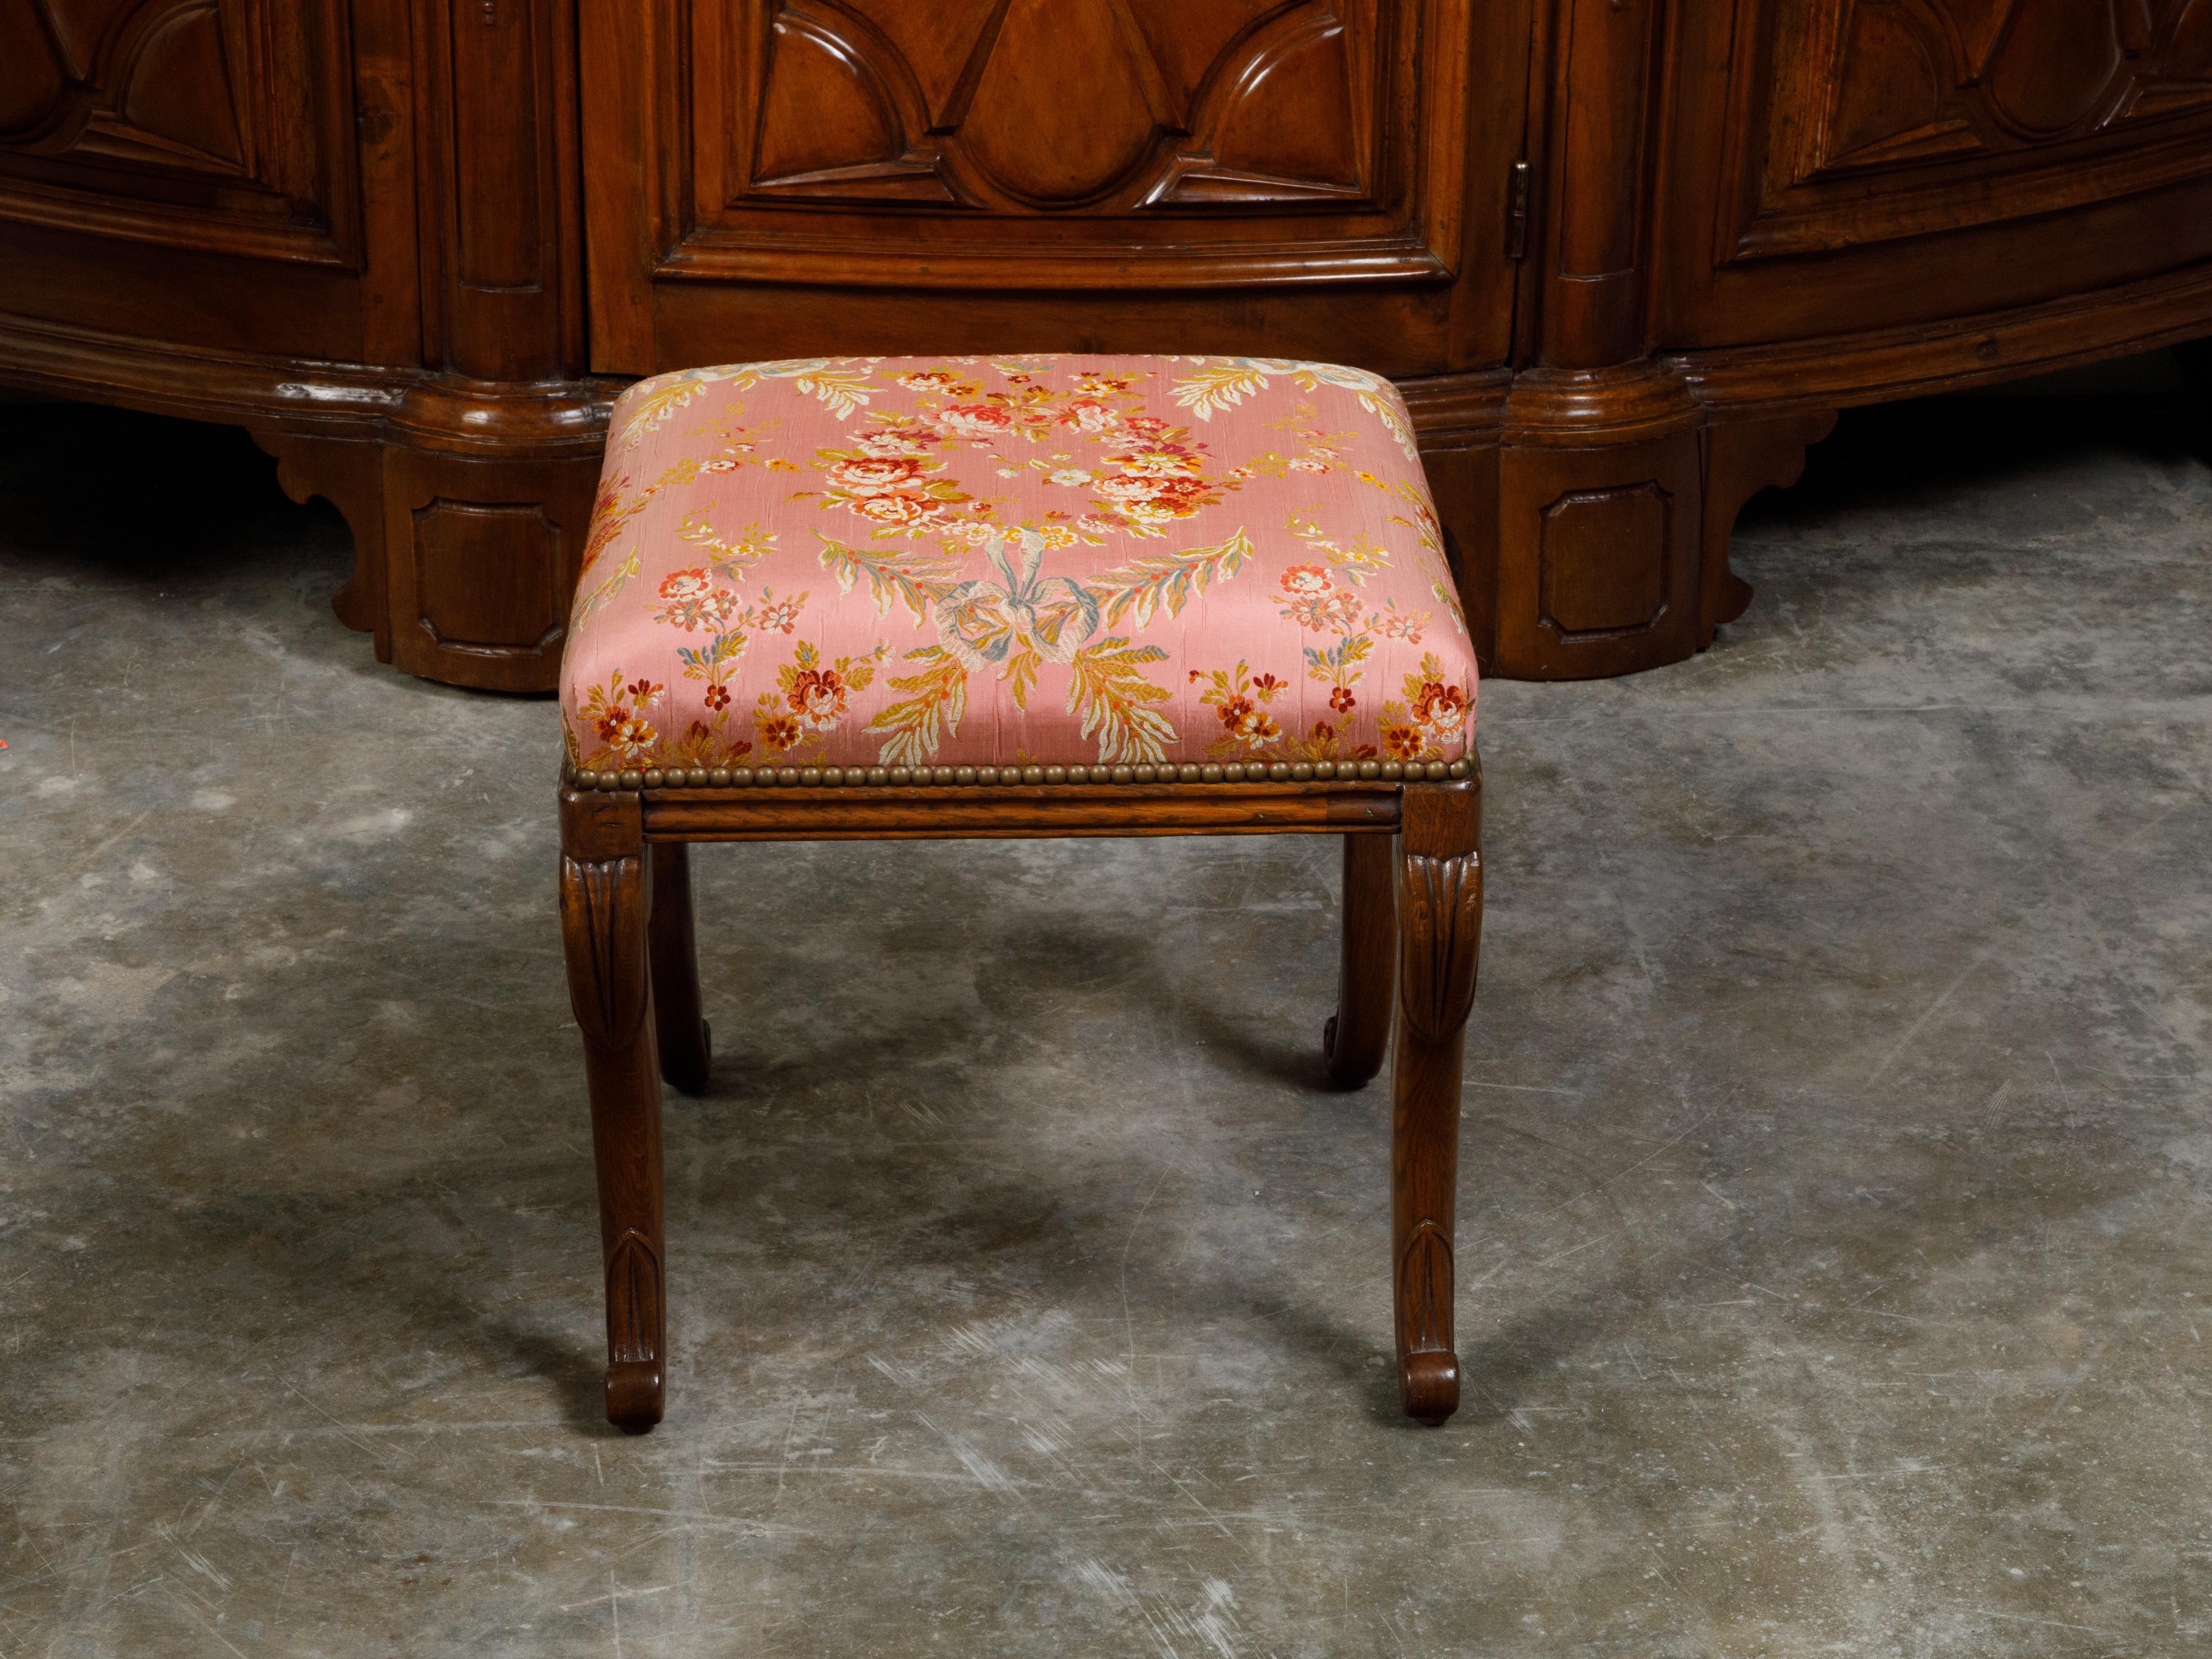 English 1820s Mahogany Stool with Floral Themed Upholstery and Cabriole Legs For Sale 4